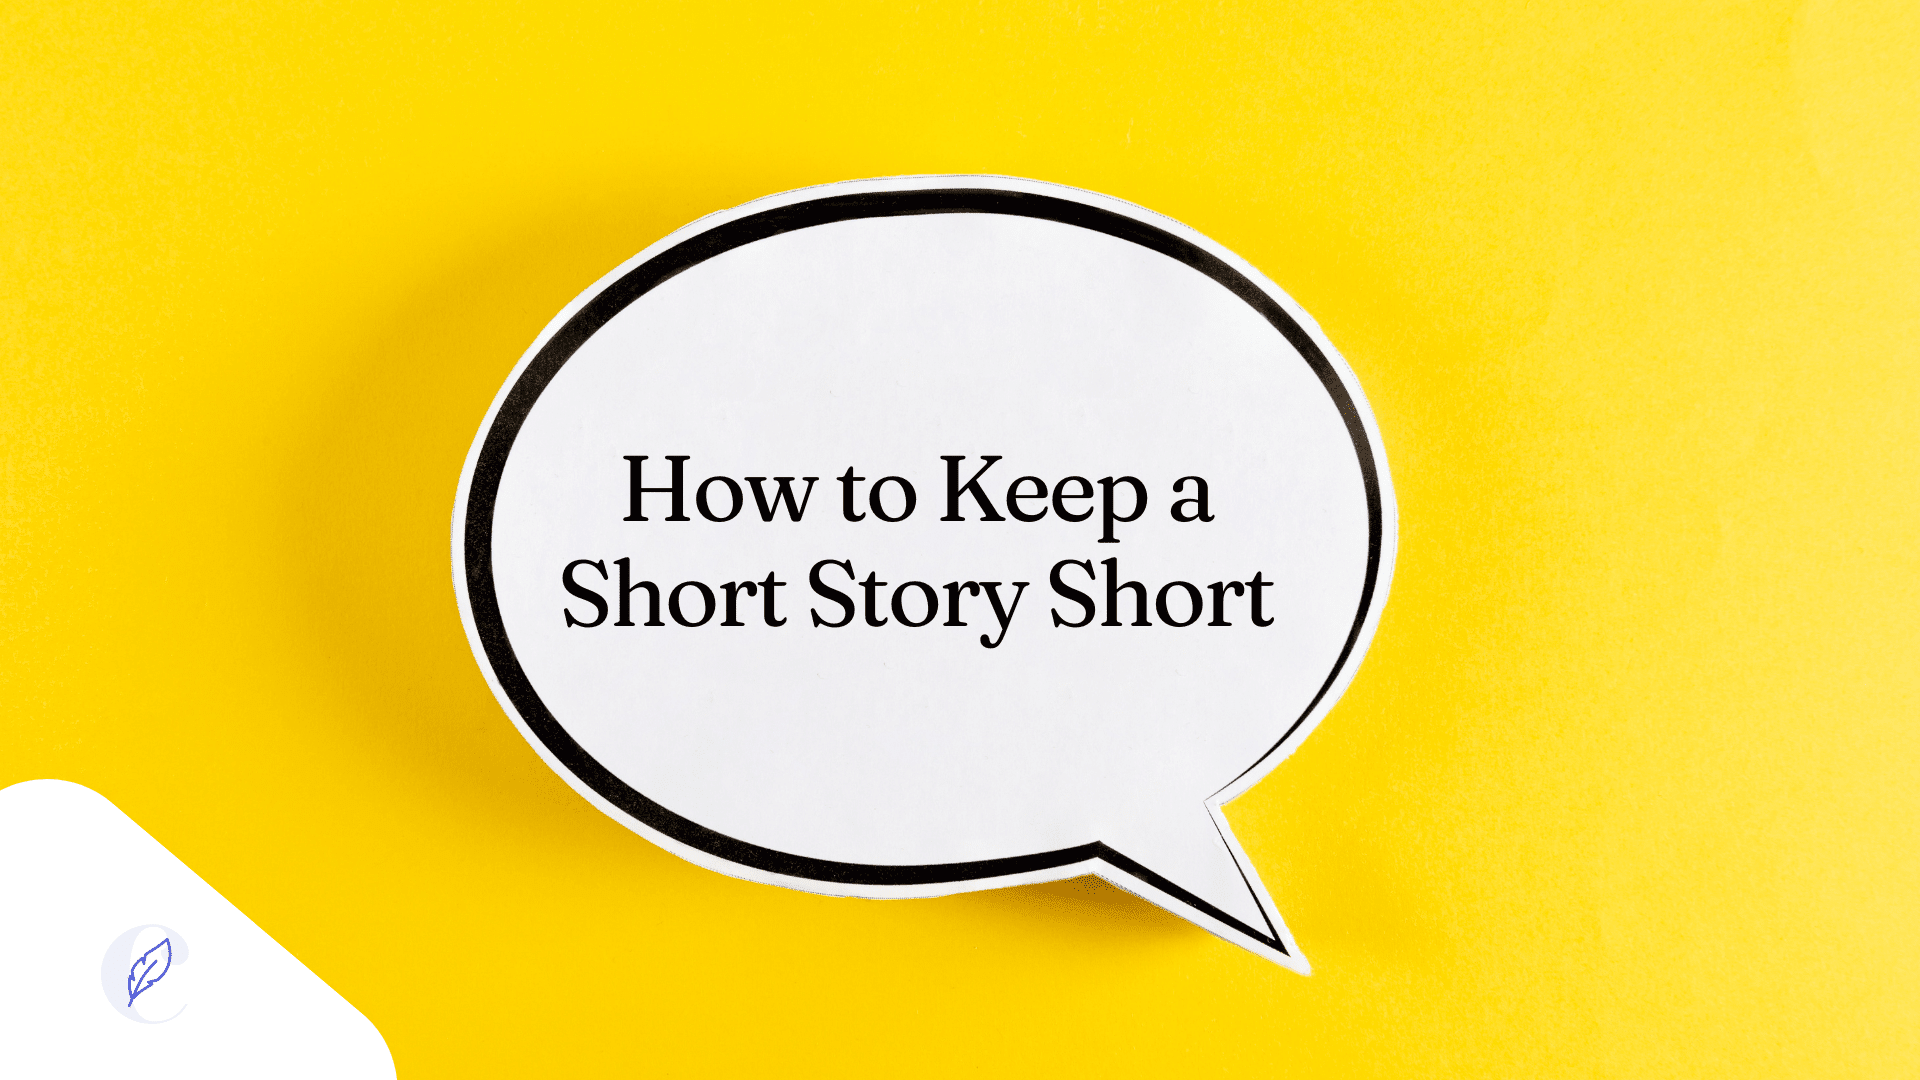 How to Keep a Short Story Short